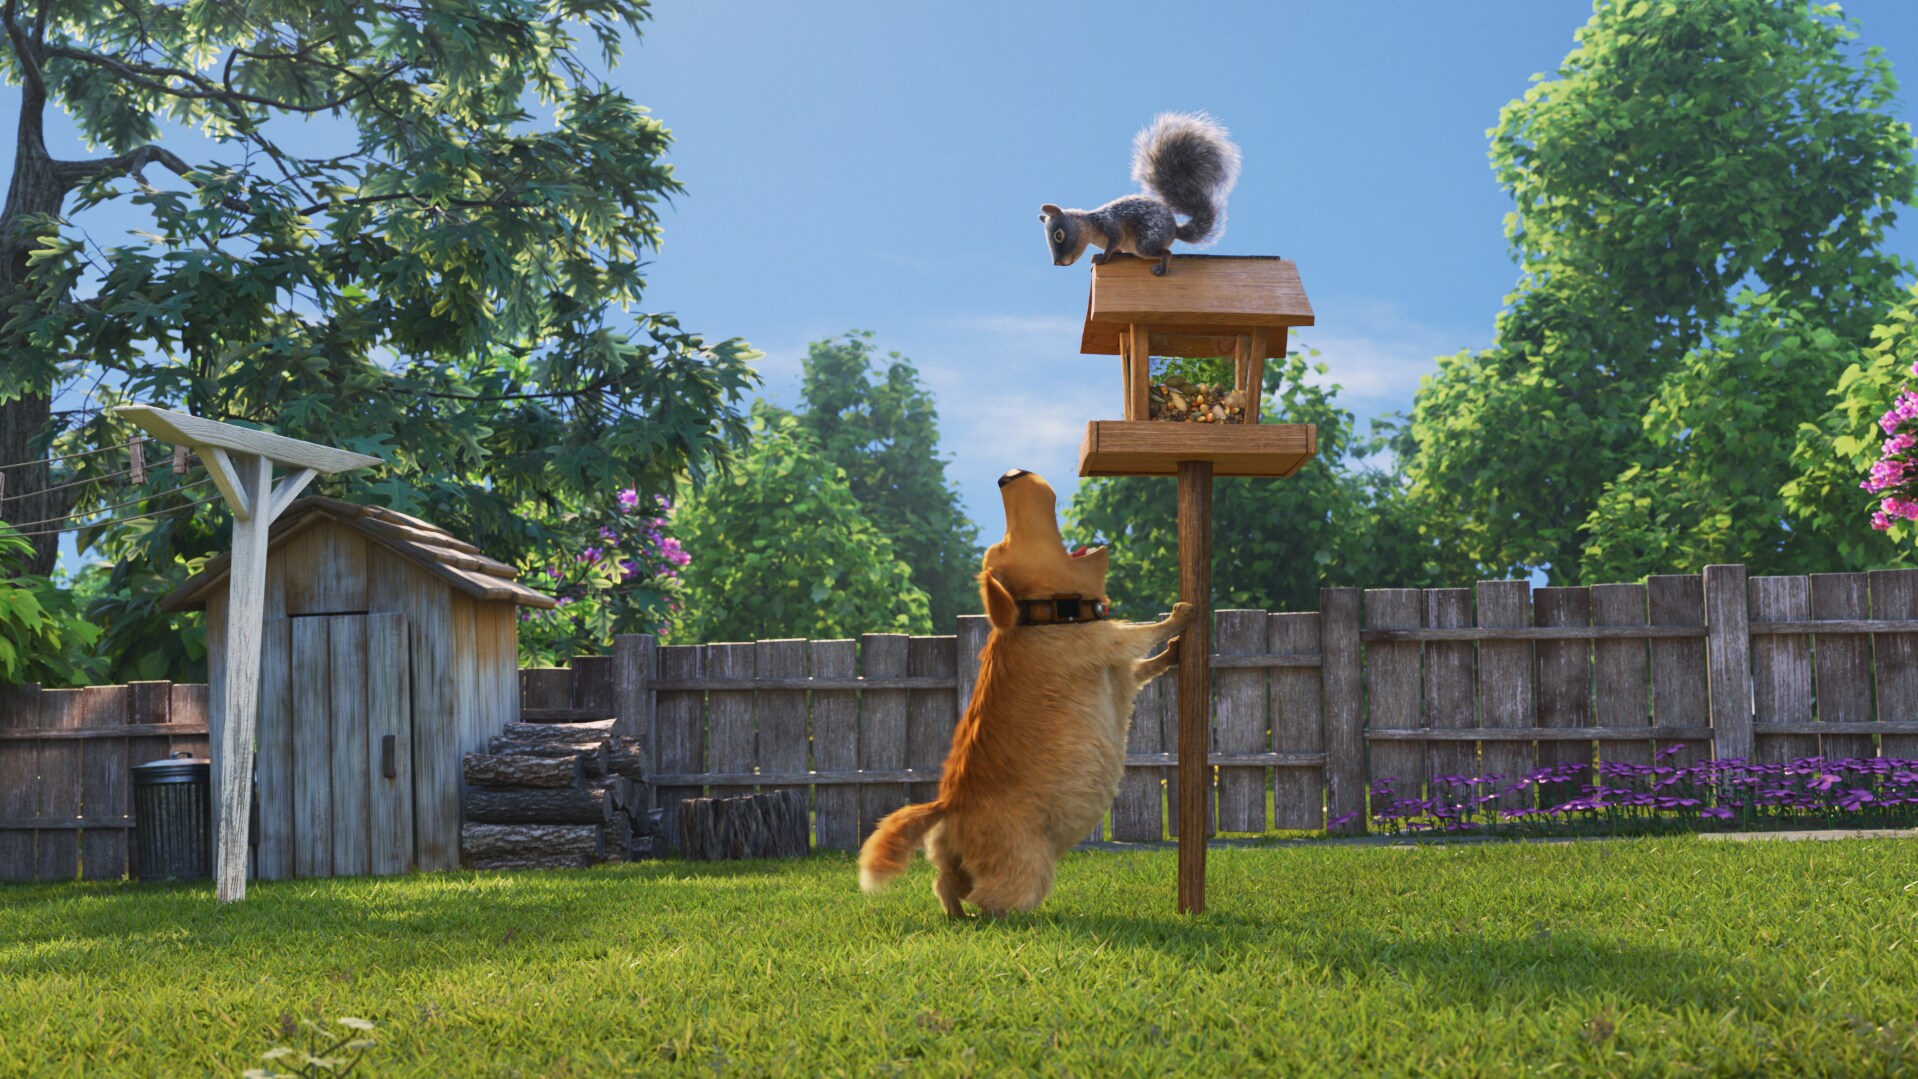 SQUIRREL -- Pixar Animation Studios’ “Dug Days” is a new collection of shorts that follows the humorous misadventures of Dug (voice of Bob Peterson), the lovable dog from Disney and Pixar’s “Up.” Each short features everyday events that occur in and around Dug's backyard—like going nose-to-nose with an unwelcome squirrel (of course!). Written and directed by Academy Award® nominee and Emmy® Award winner Bob Peterson and produced by Kim Collins, the shorts premiere exclusively on Disney+ on Sept. 1, 2021. © 2021 Disney/Pixar. All Rights Reserved.